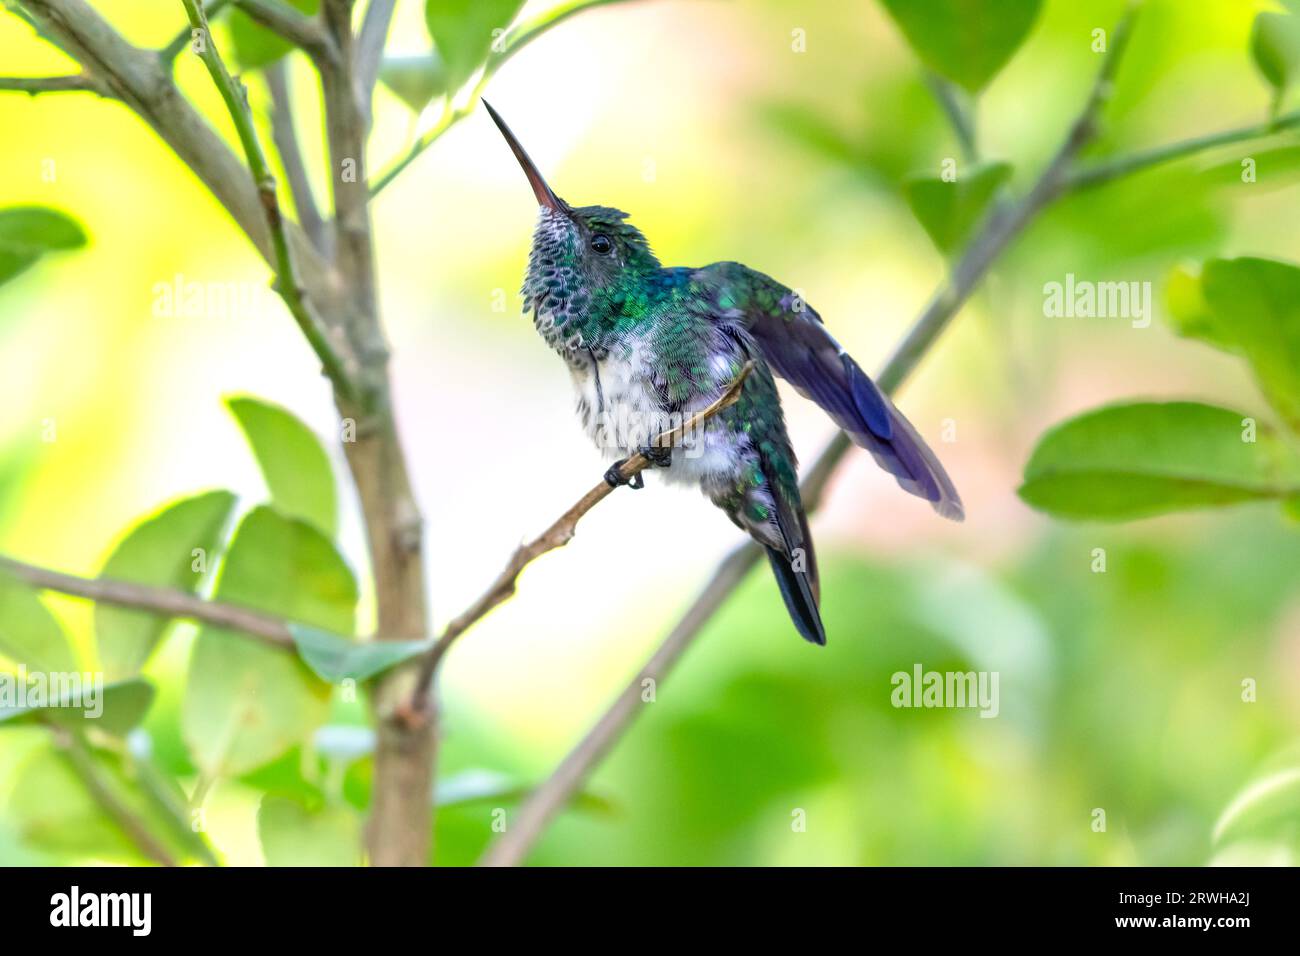 Blue-chinned Sapphire hummingbird, Chlorestes notata, perching in a lemon tree stretching with a light pastel background Stock Photo